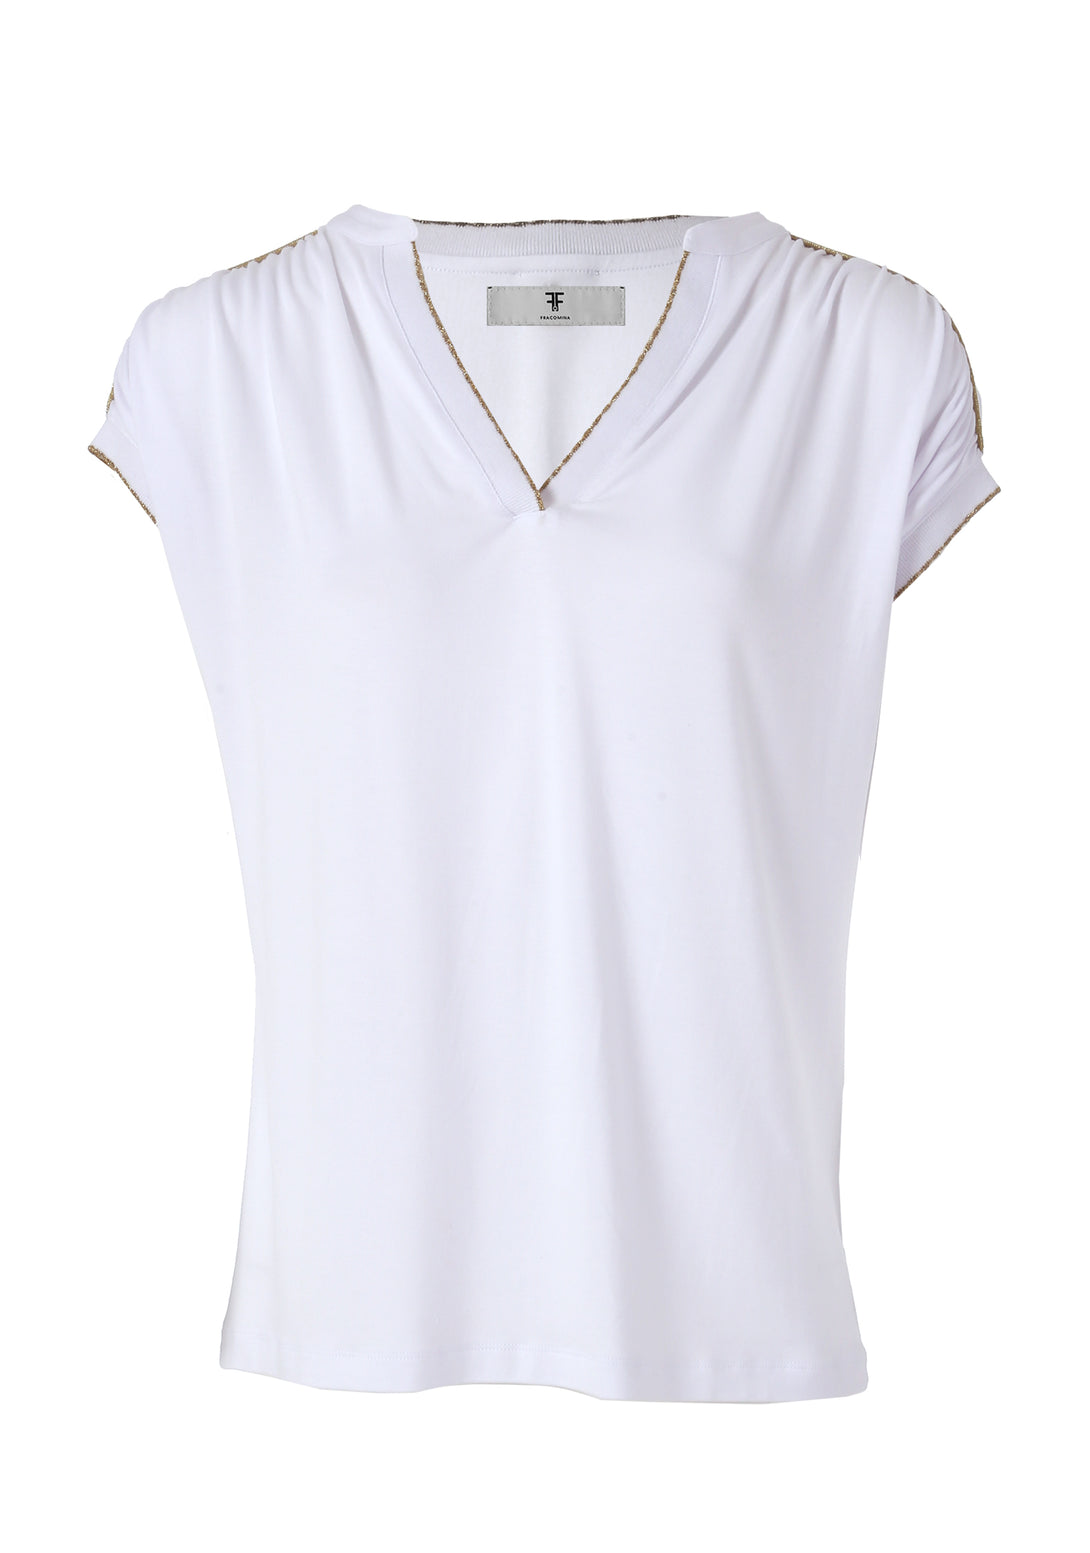 Top regular fit made in viscose jersey